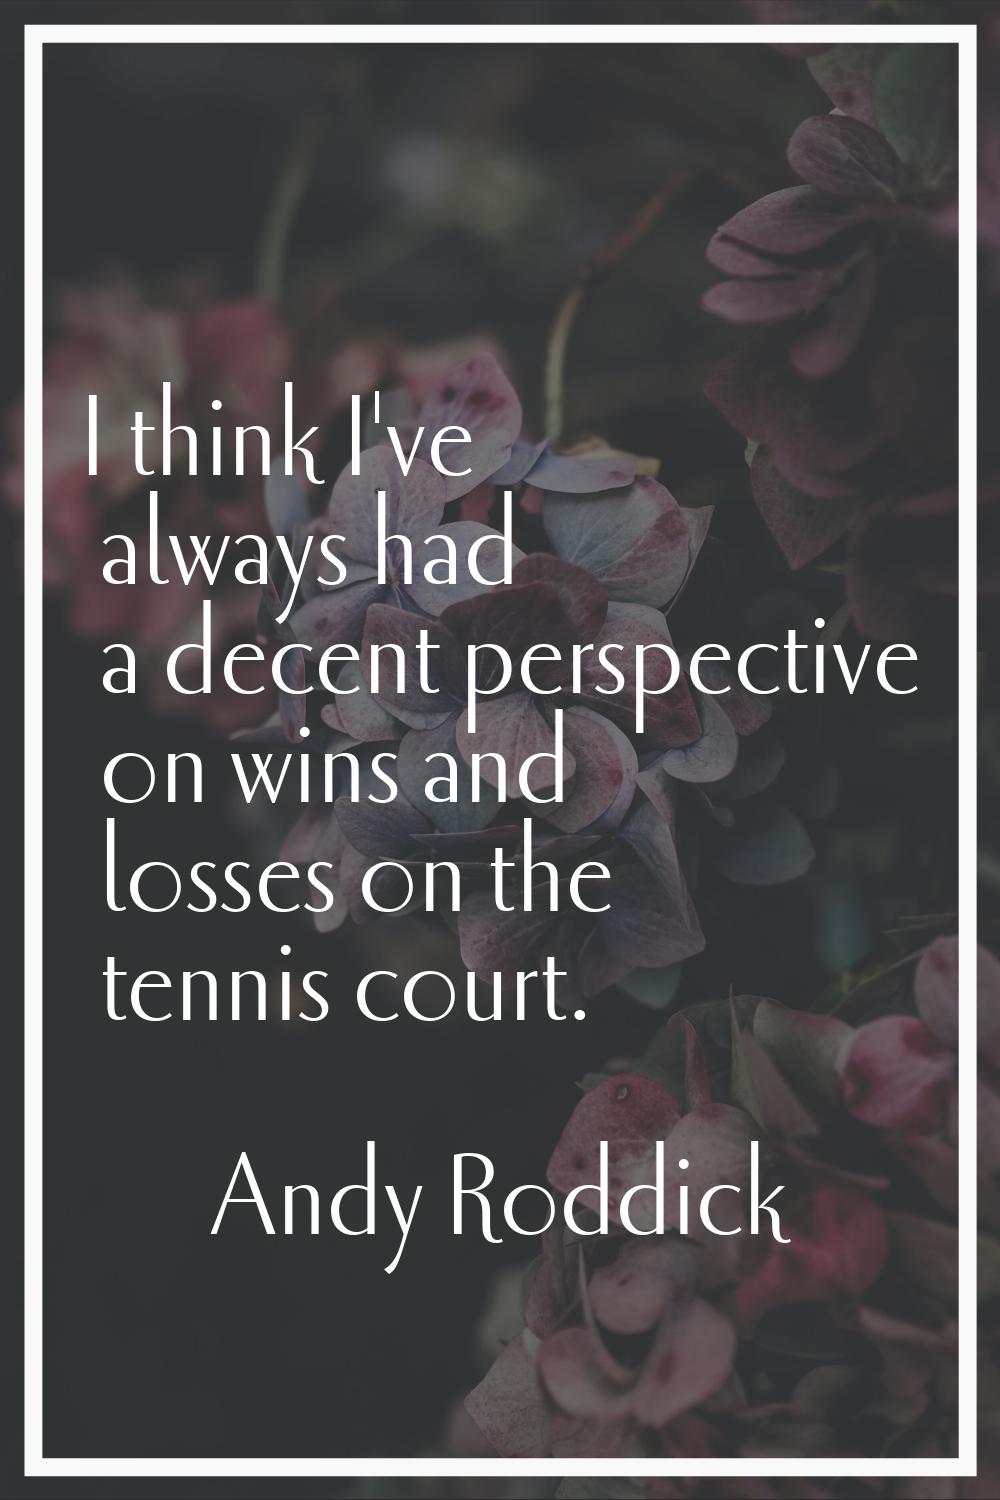 I think I've always had a decent perspective on wins and losses on the tennis court.